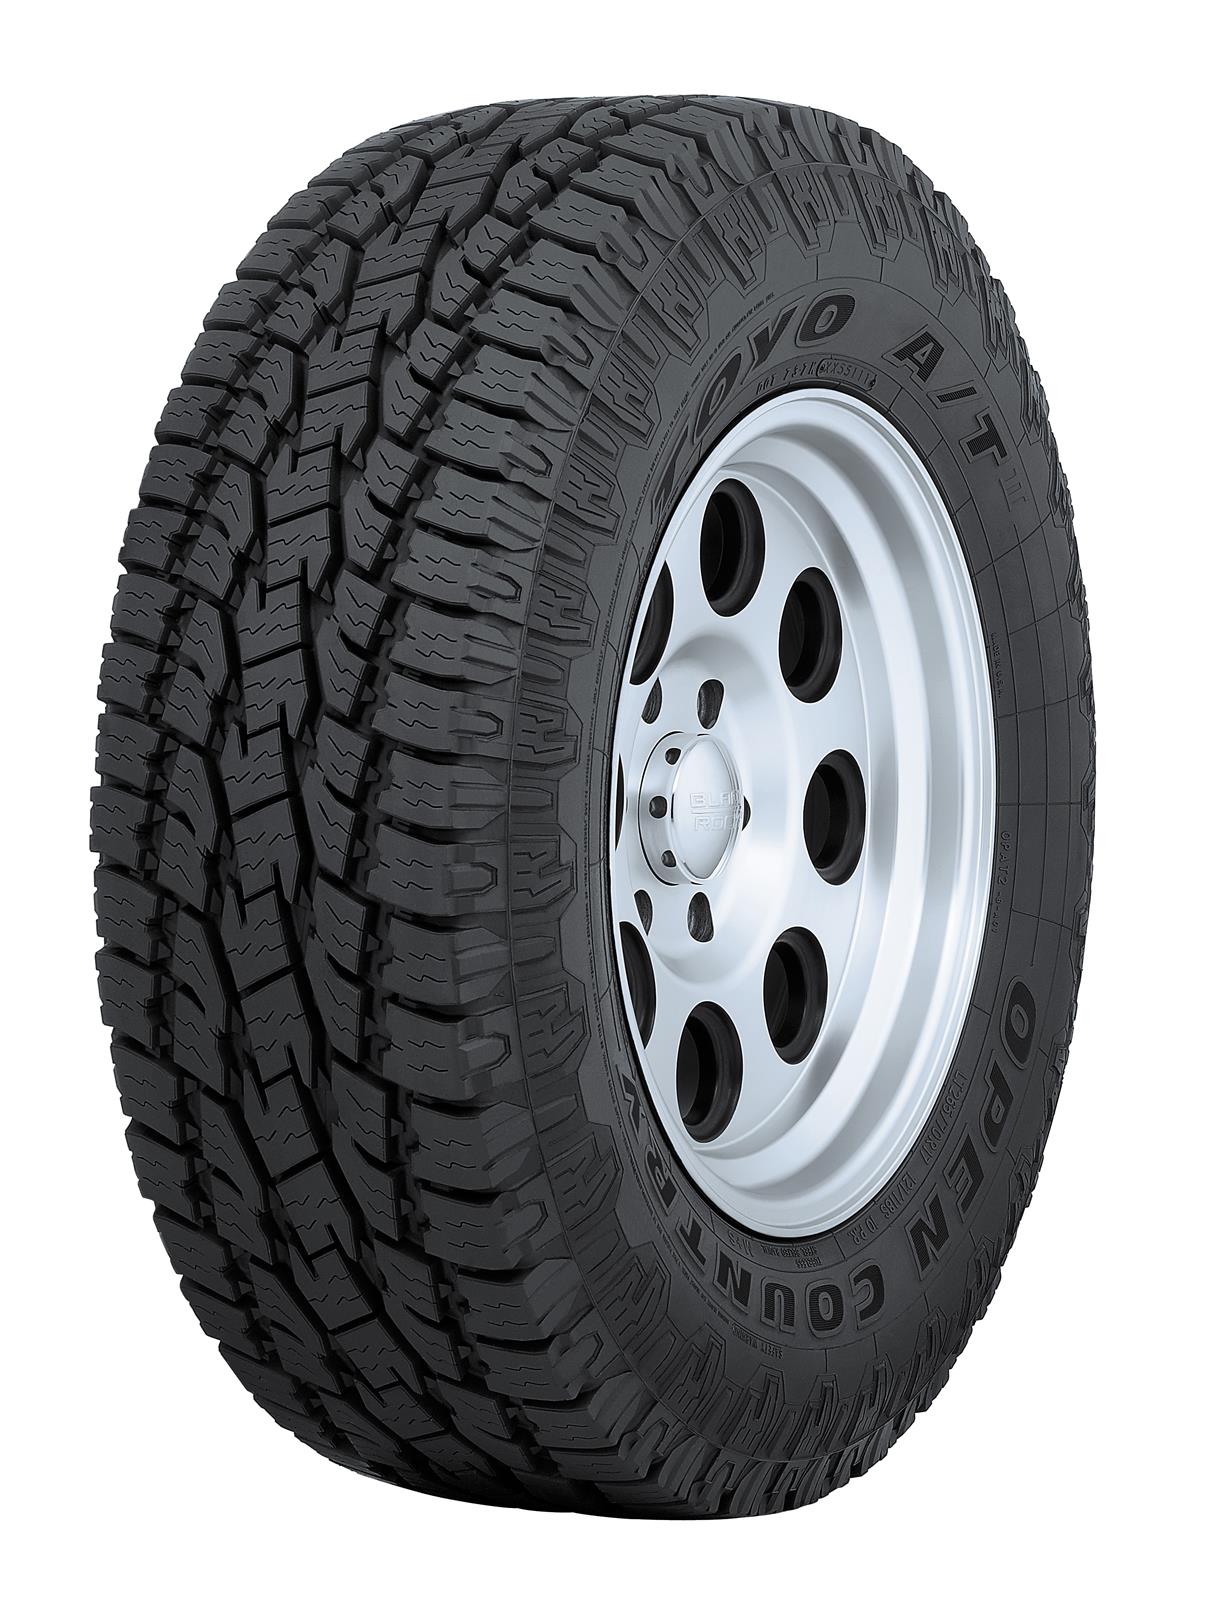 Toyo Open Country A/T III LT305/70R17 E